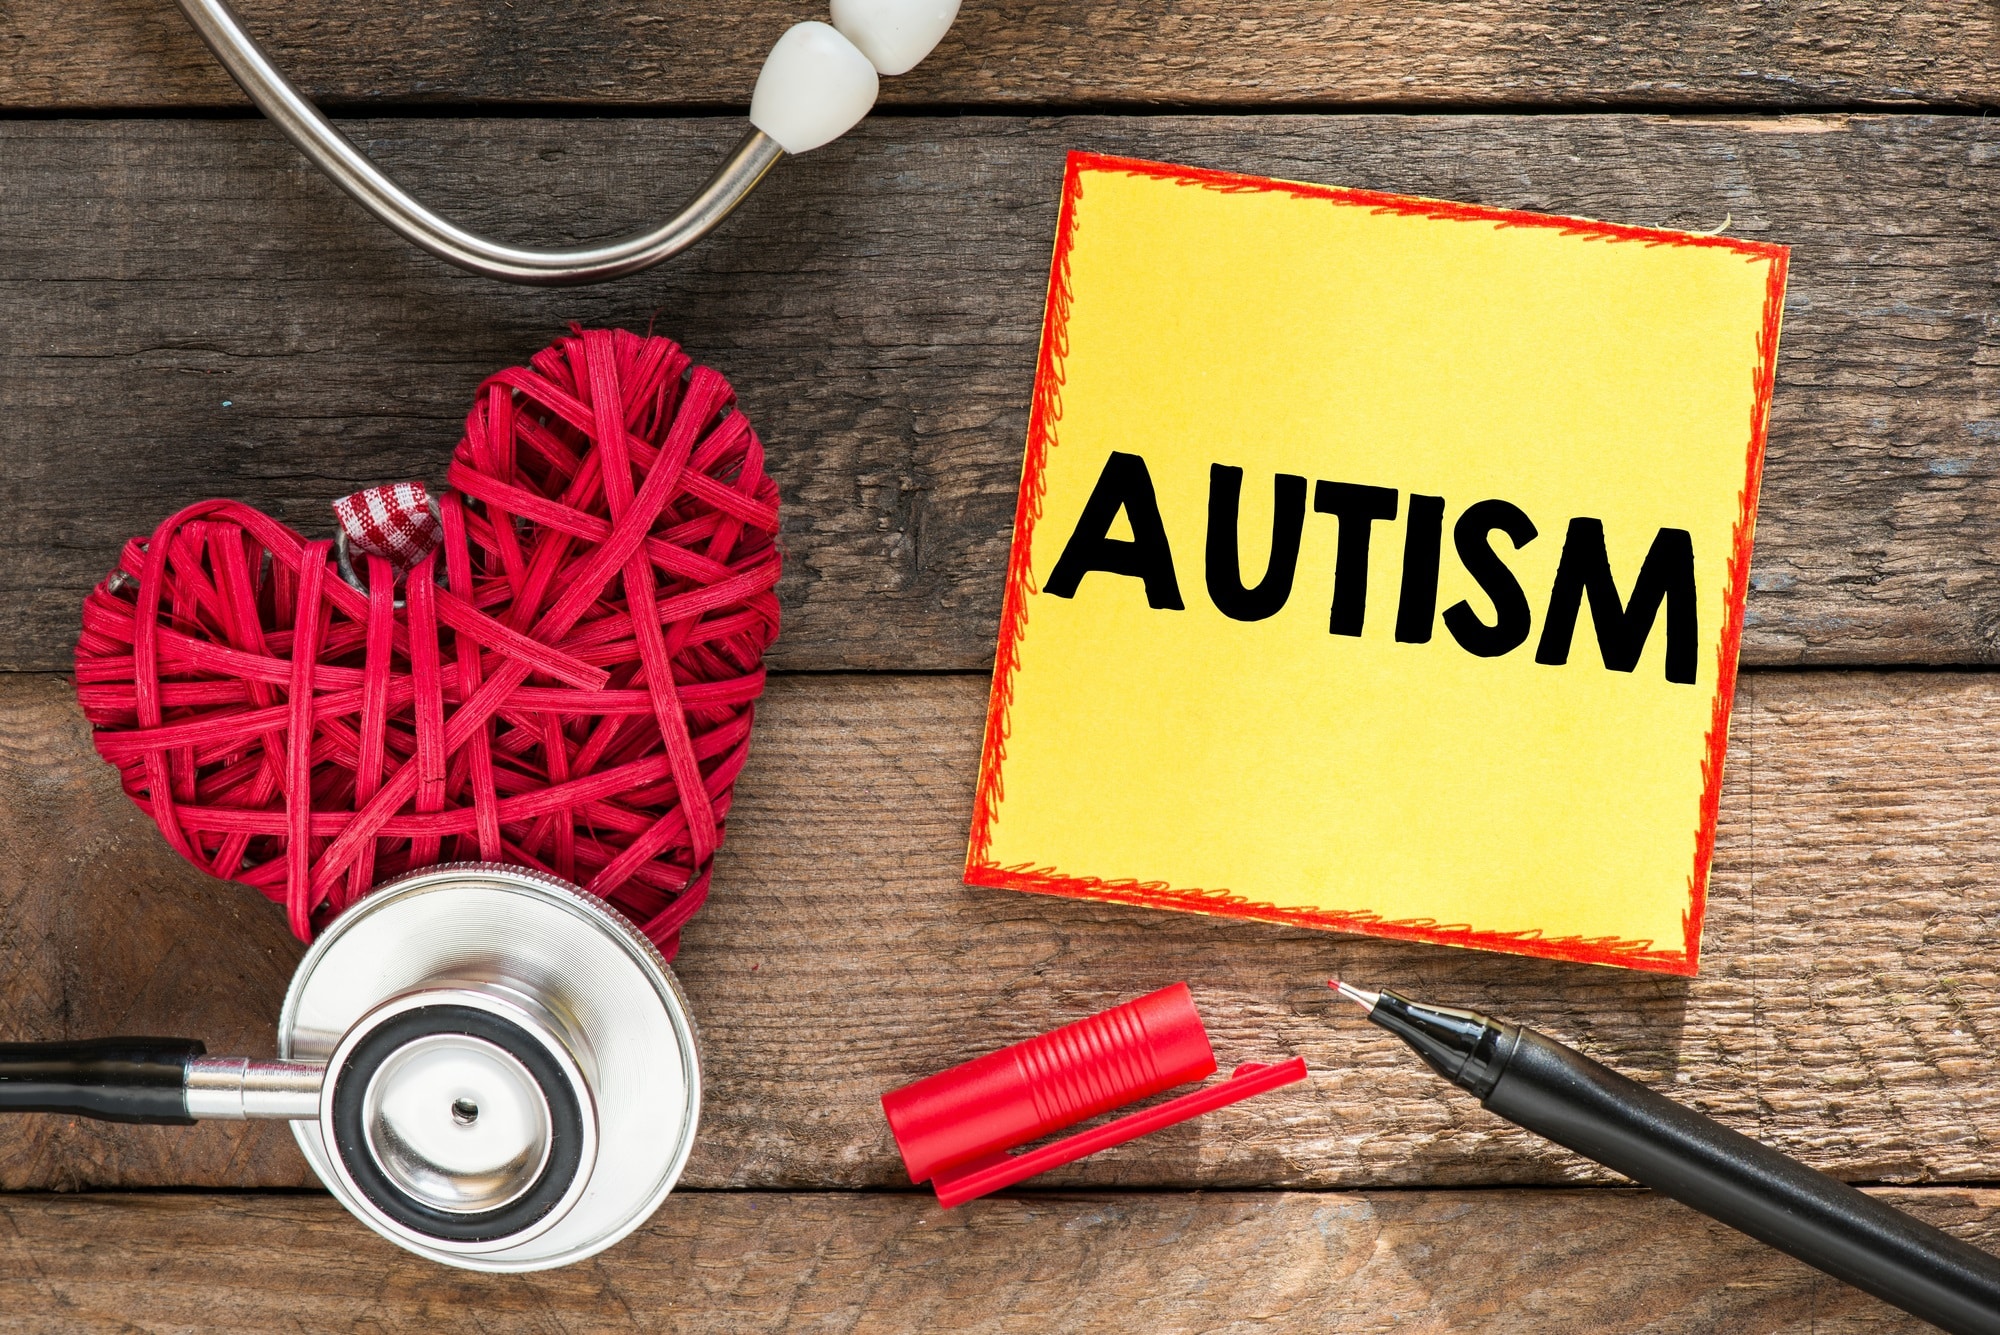 Autism Spectrum Disorder Therapeutics Market to Grow at a Substantial Growth Rate During the Study Period (2019-2032)